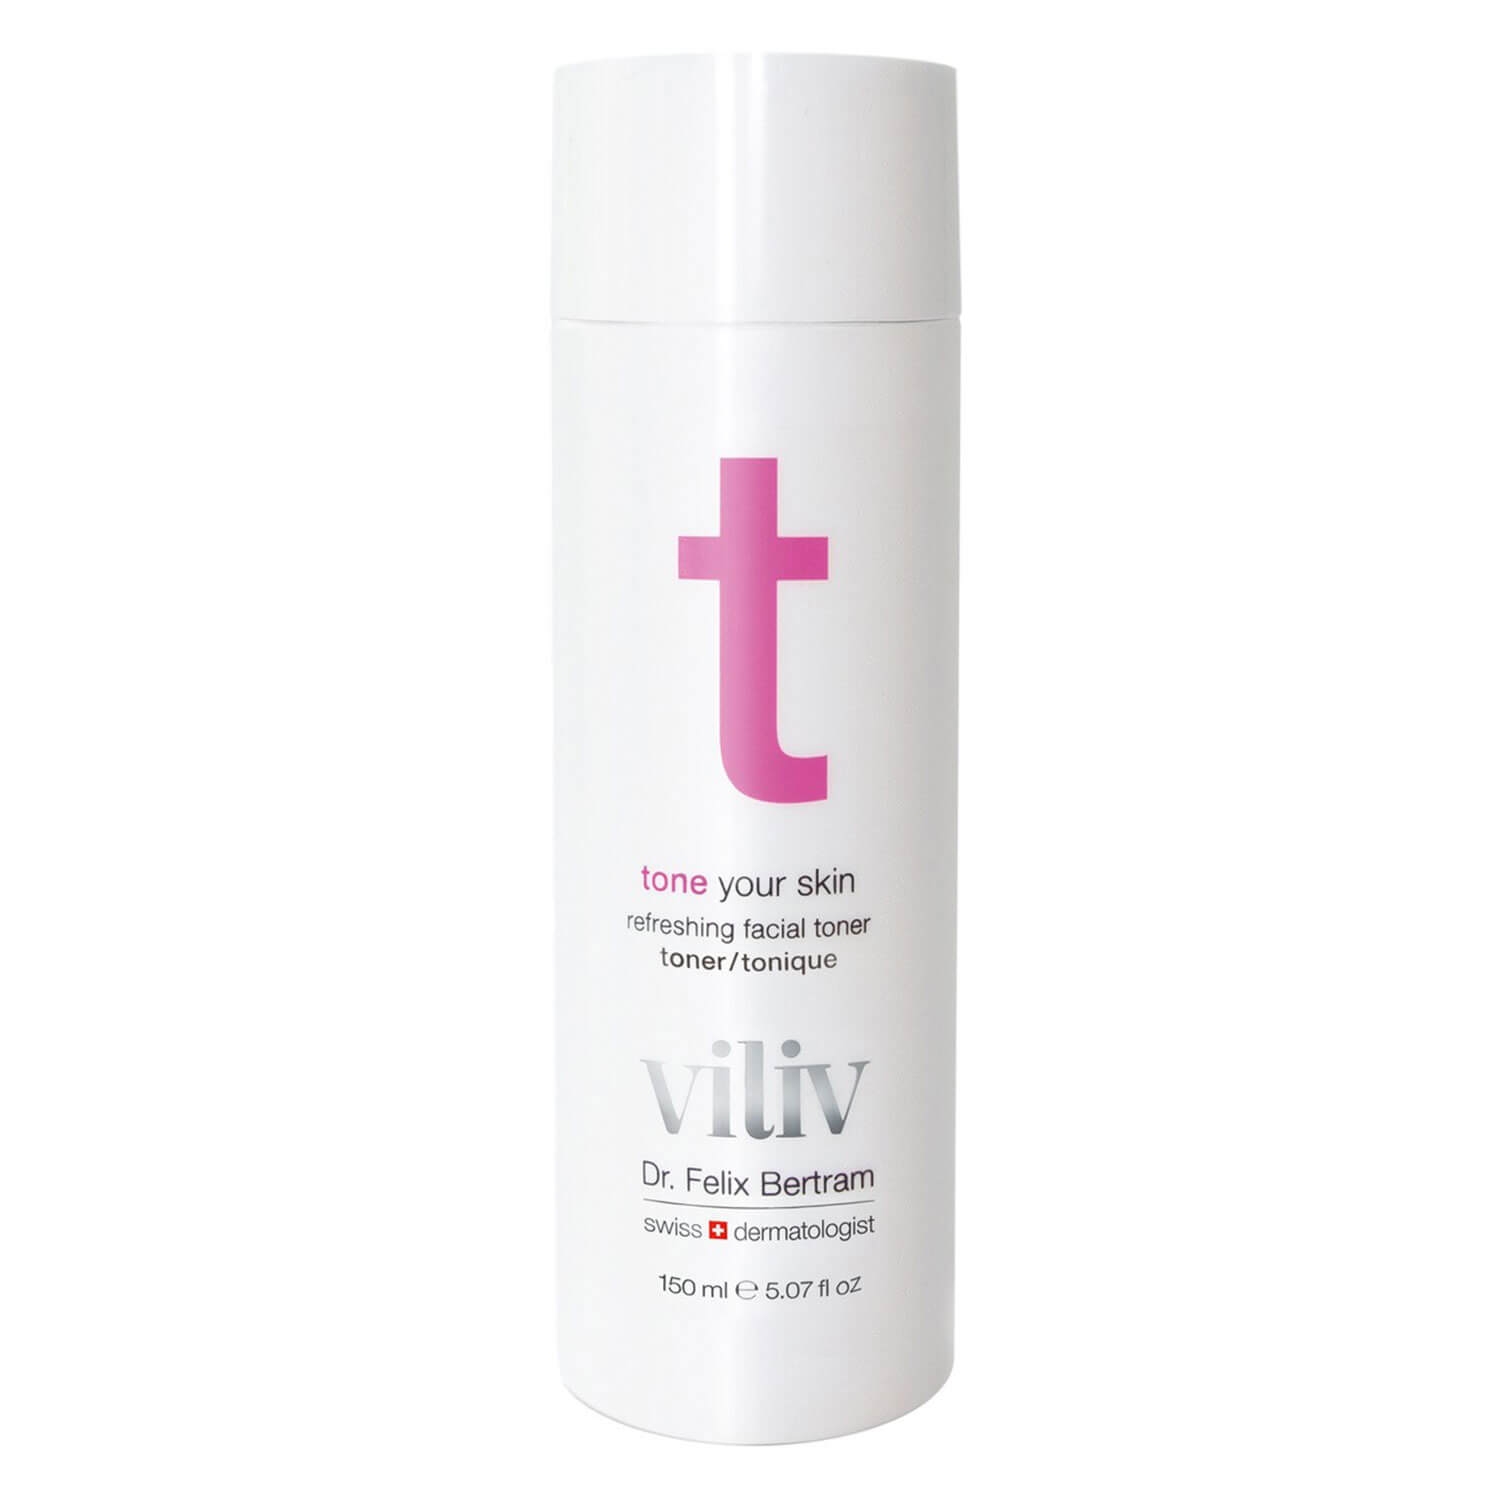 Product image from viliv - tone your skin refreshing facial toner